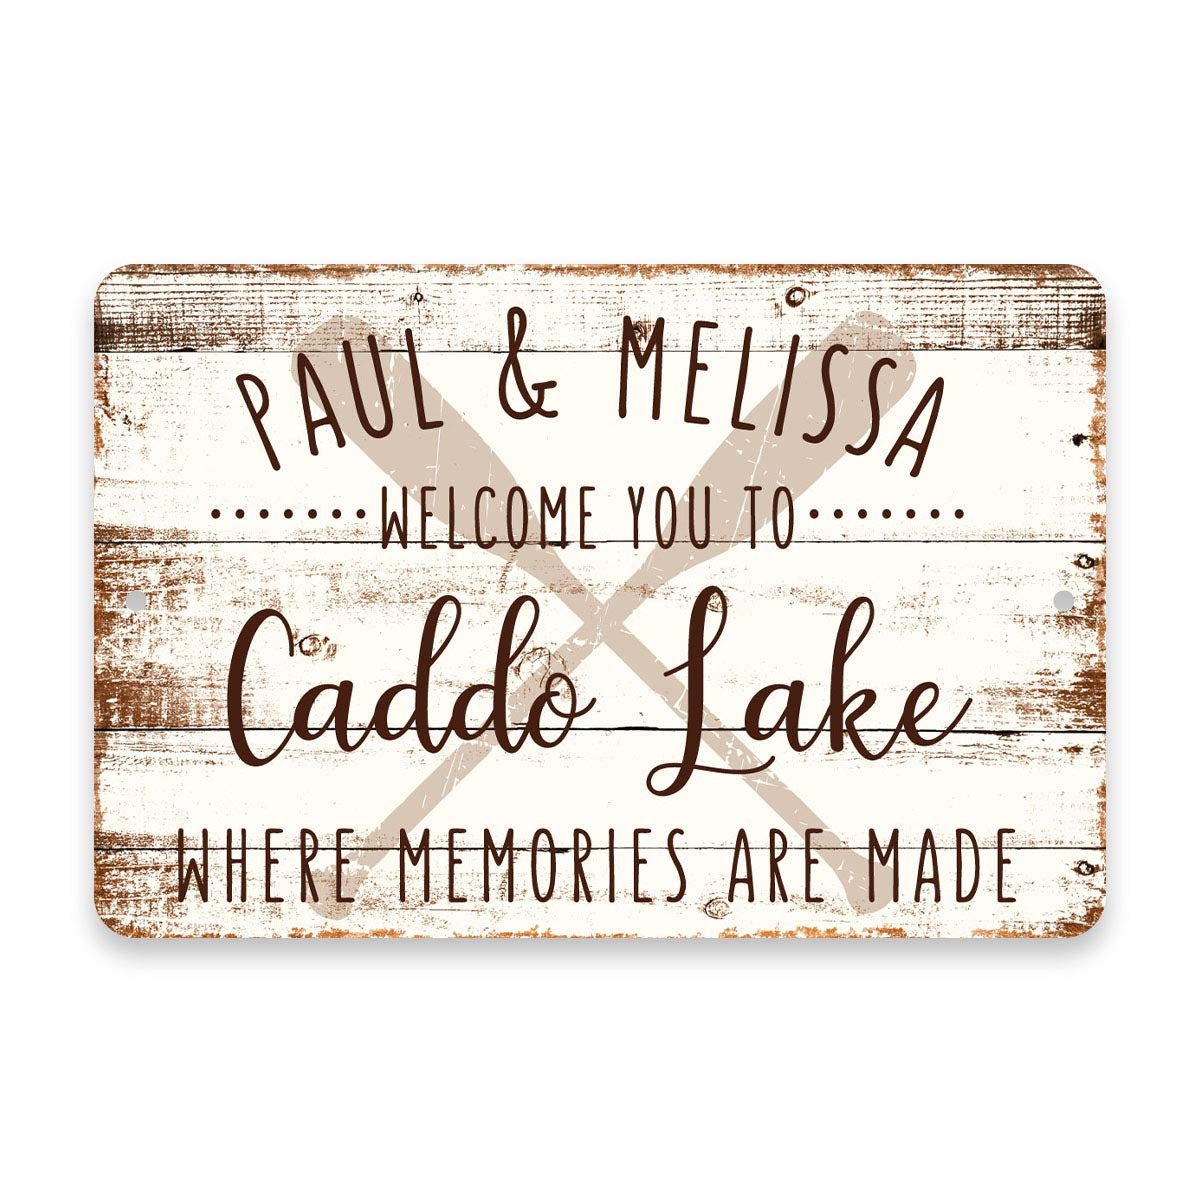 Personalized Welcome to Caddo Lake Where Memories are Made Sign - 8 X 12 Metal Sign with Wood Look